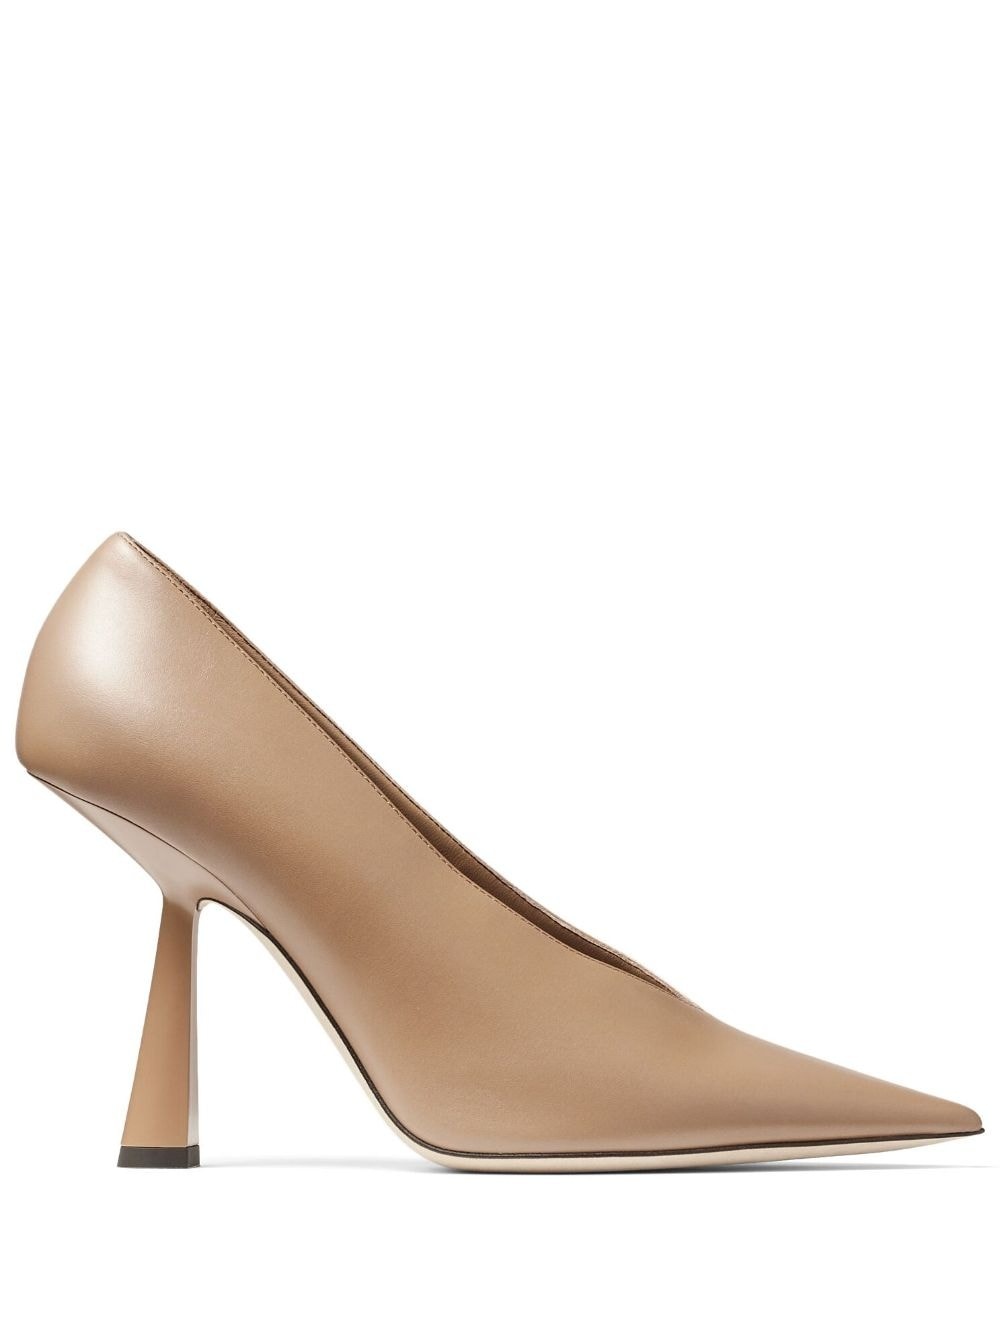 Maryanne 100mm leather pumps - 1